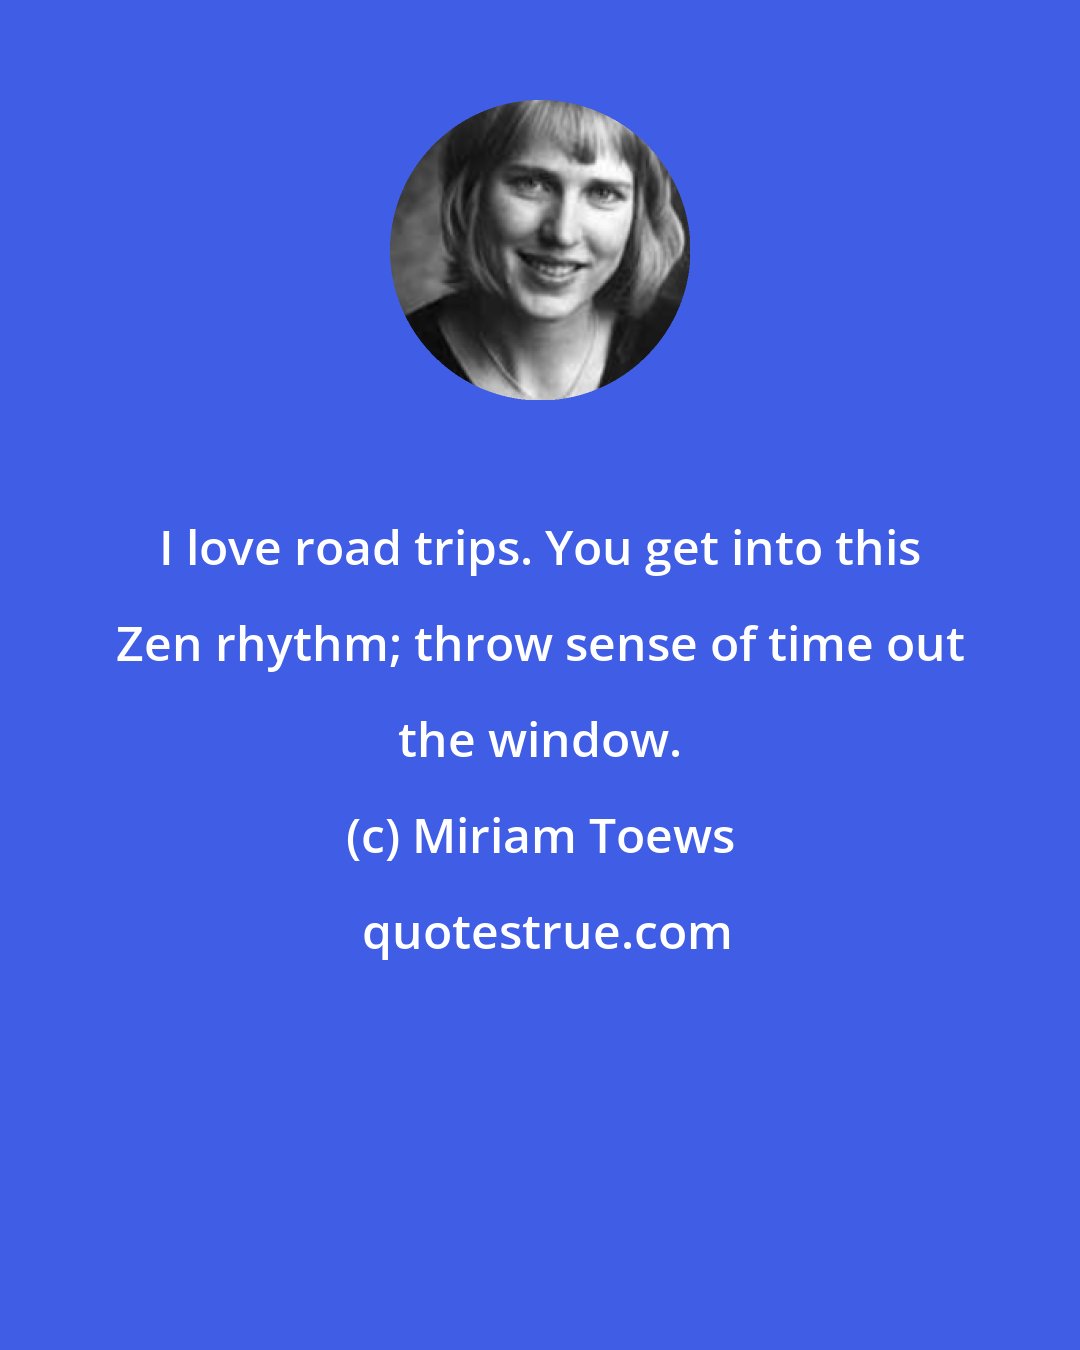 Miriam Toews: I love road trips. You get into this Zen rhythm; throw sense of time out the window.